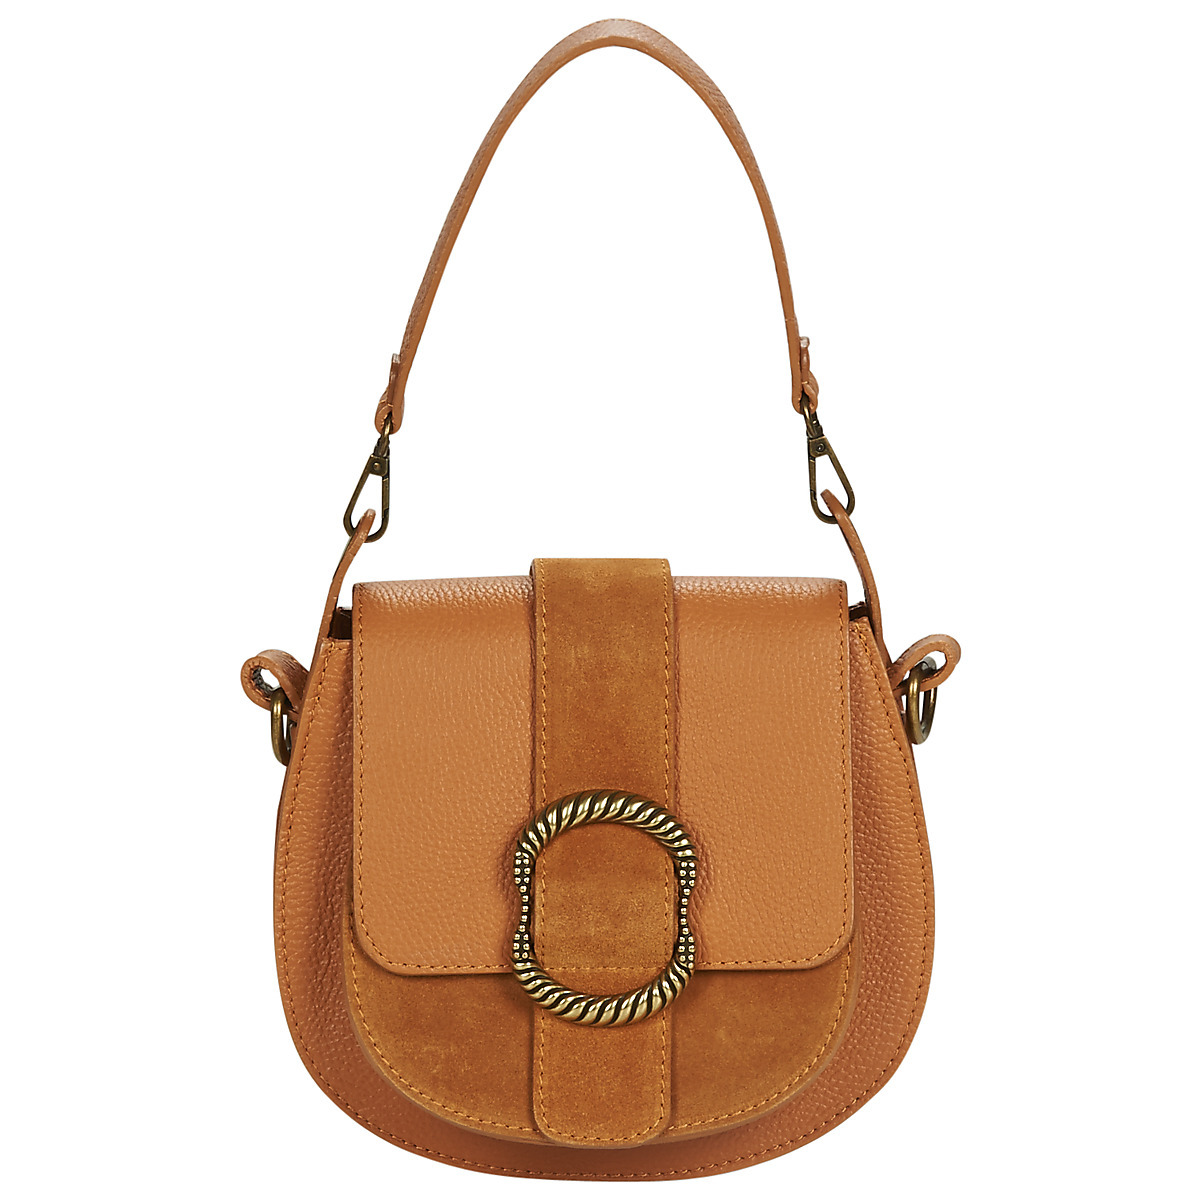 Spartoo - Women's Brown Shoulder Bag from Betty London GOOFASH